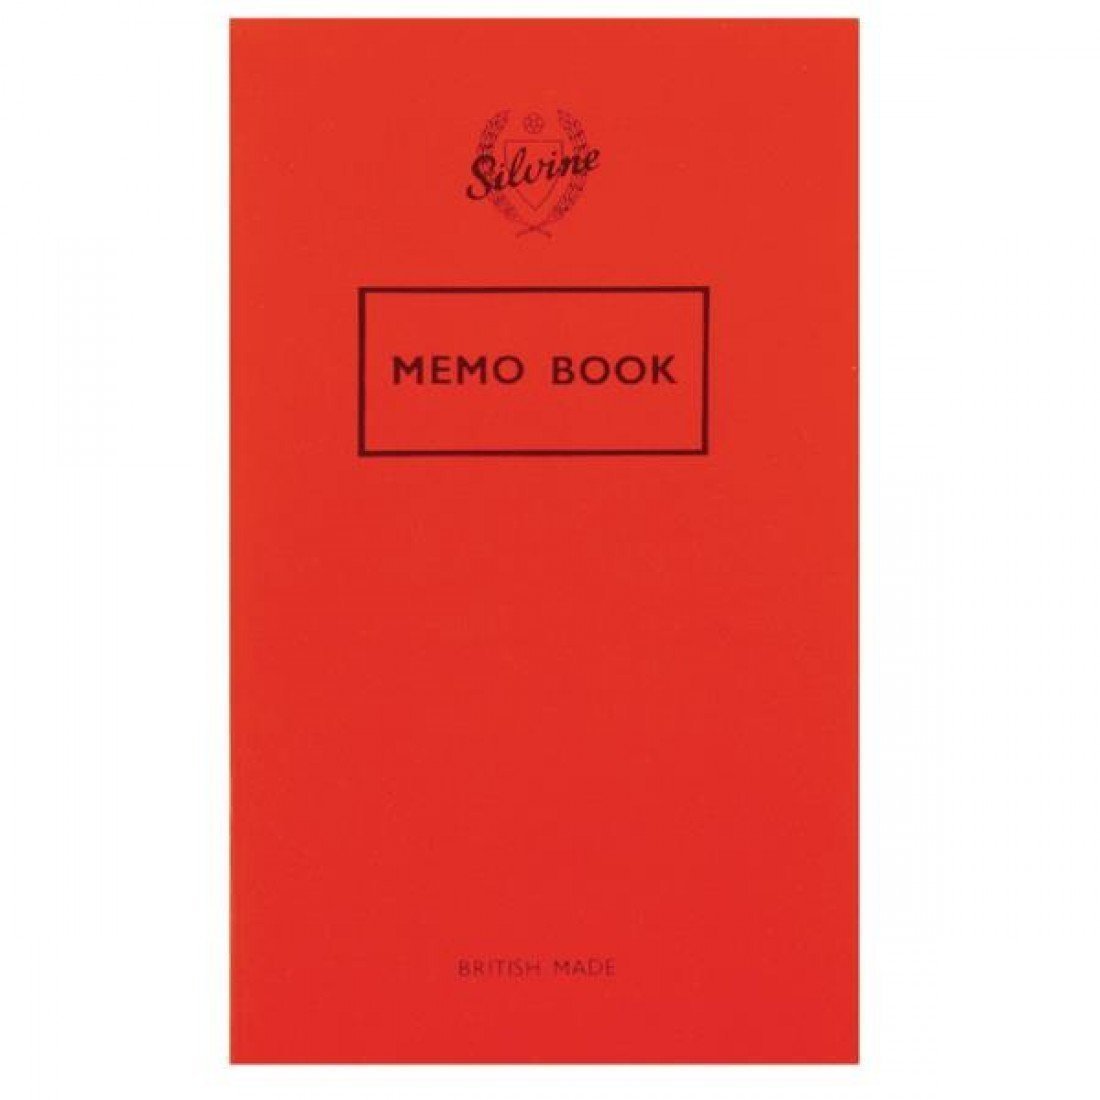 Memo Book, 158x99mm, 72 pages